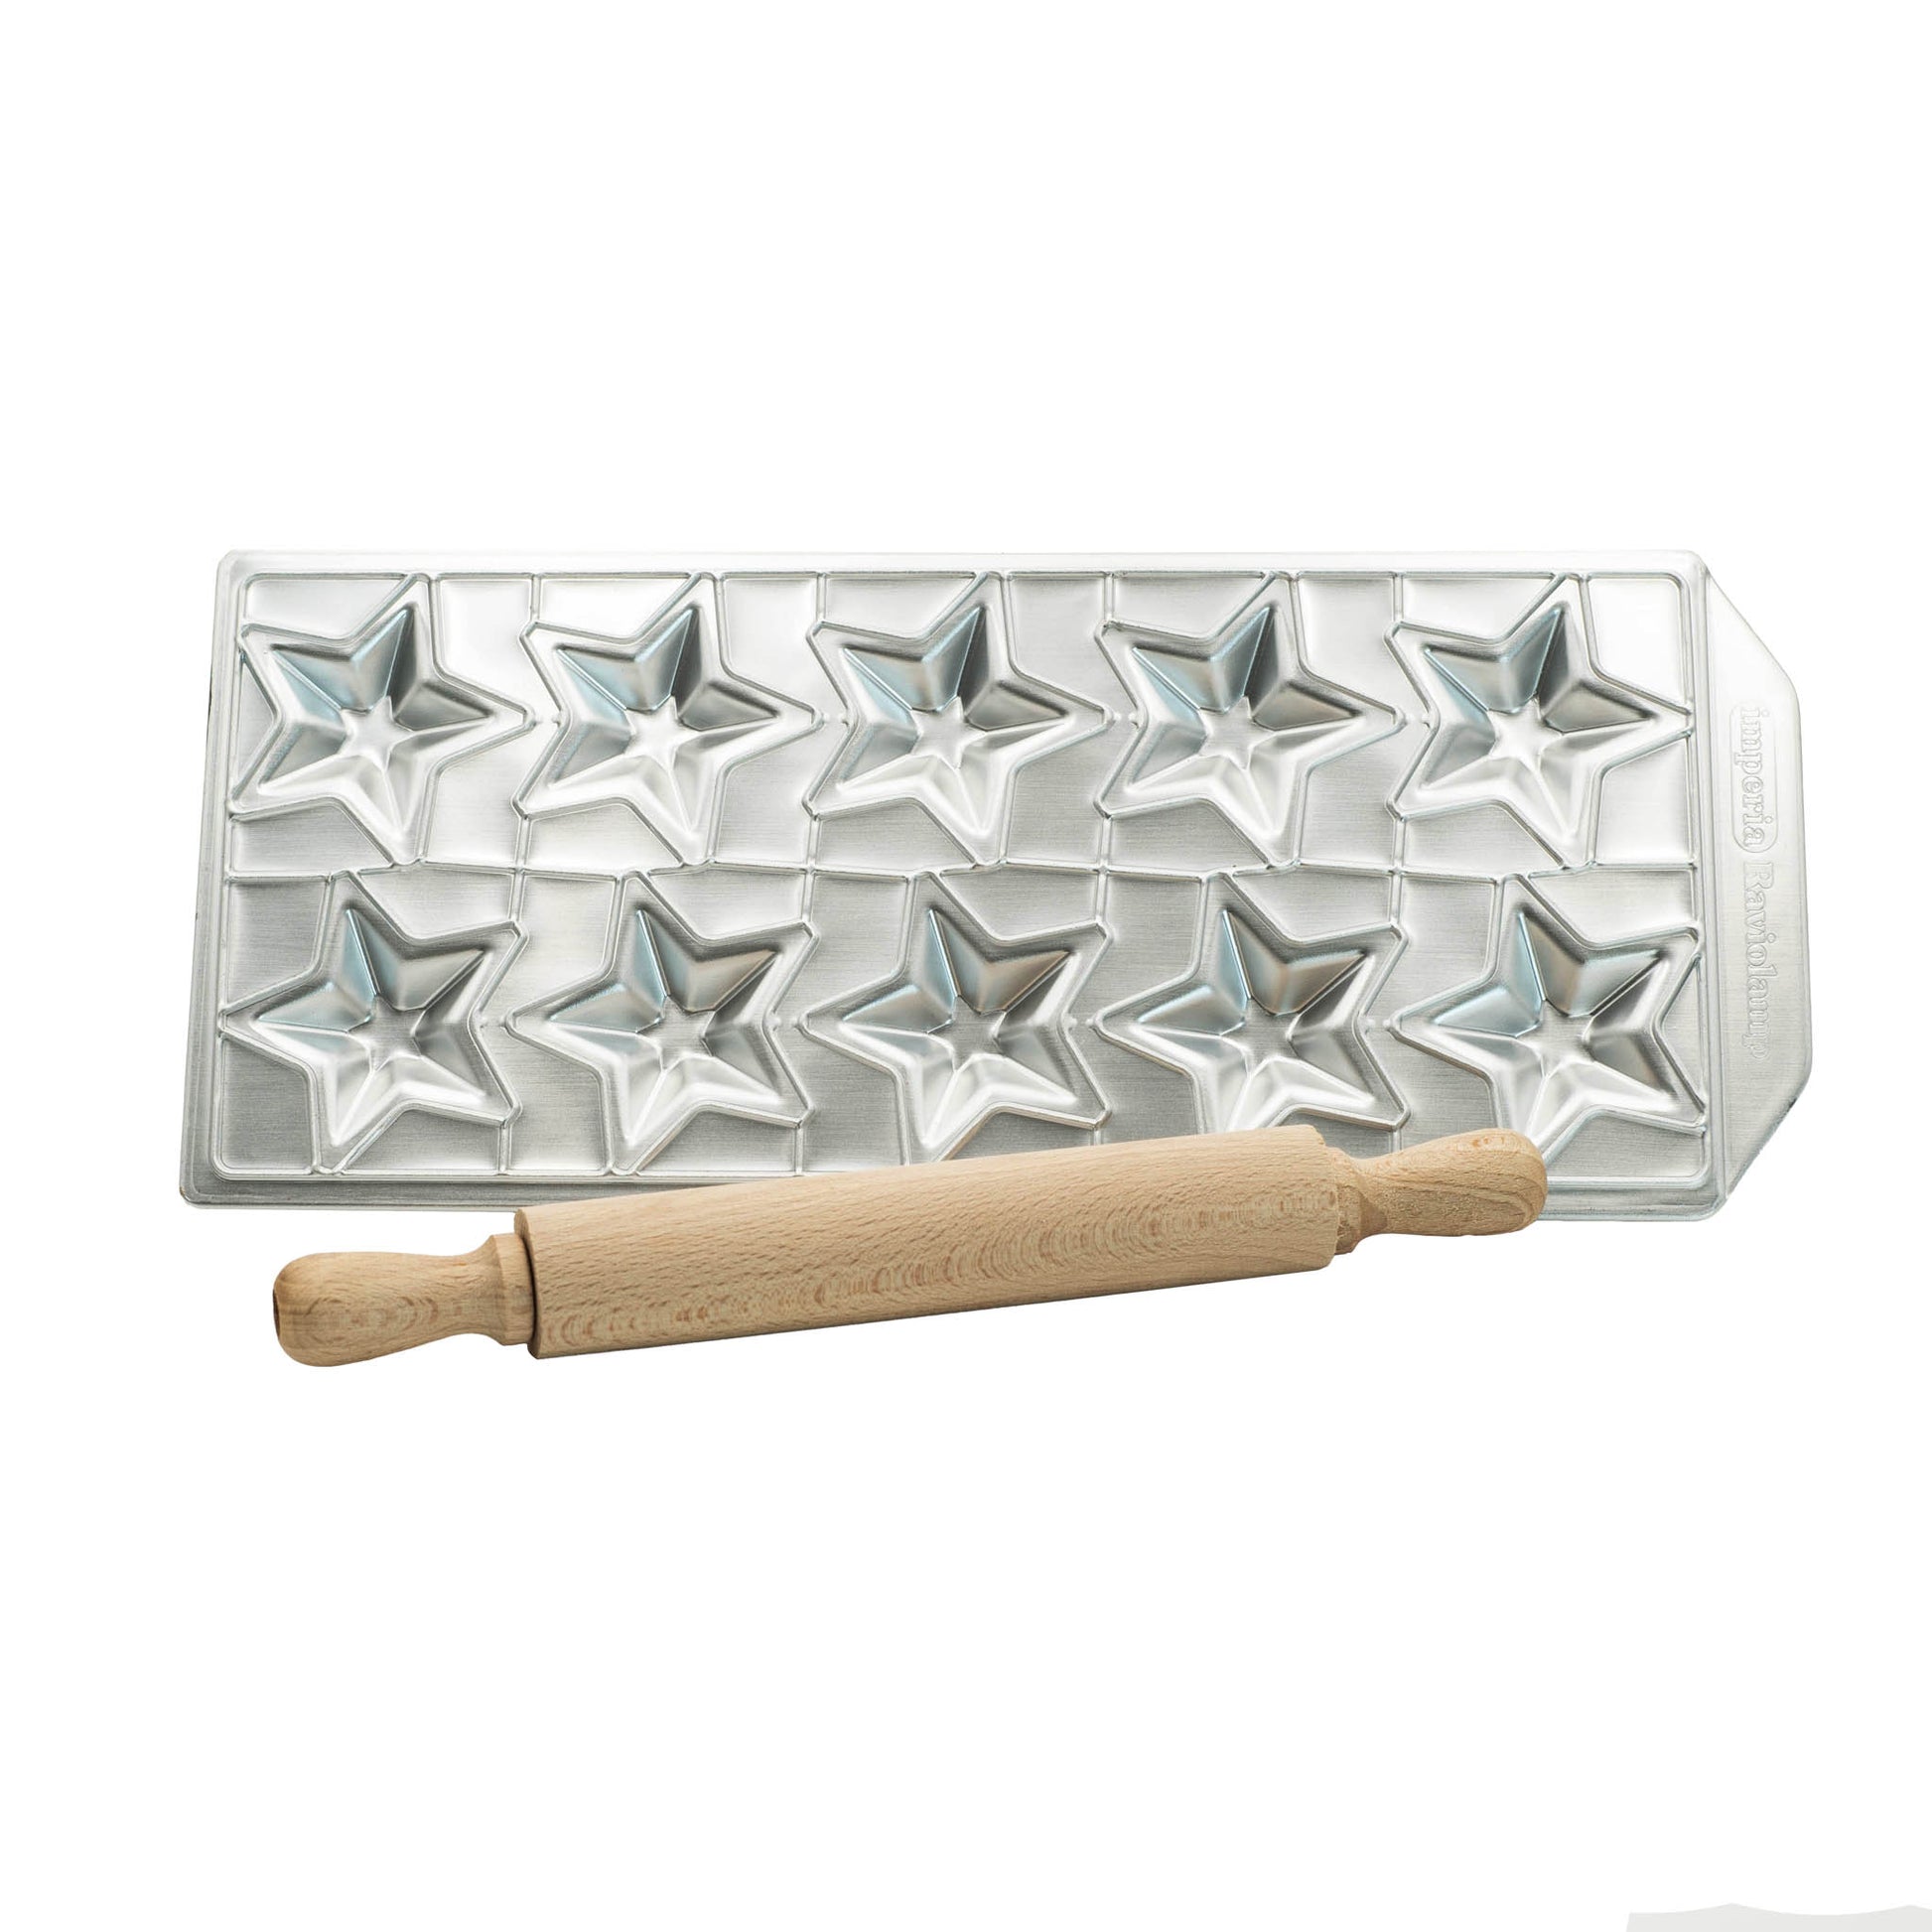 italian made imperia ravioli star shape mould with wooden rolling pin. Makes 10 each time. 